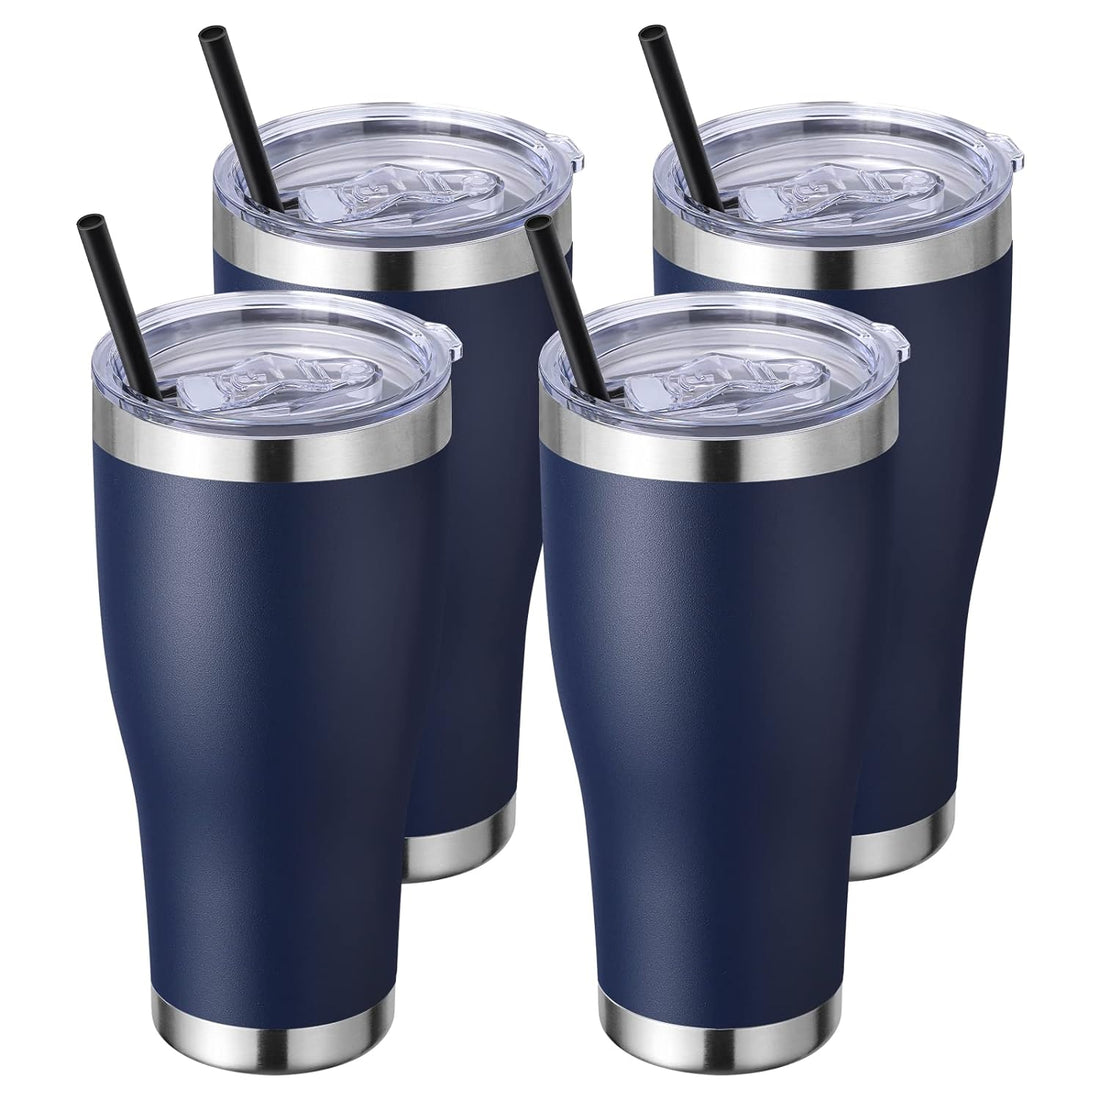 DOMICARE 30 oz Tumbler with Lid and Staw, Stainless Steel Tumblers Bulk, Insulated Vacuum Double Wall Coffee Travel Mug, Powder Coated Tumbler, Navy 4 Pack